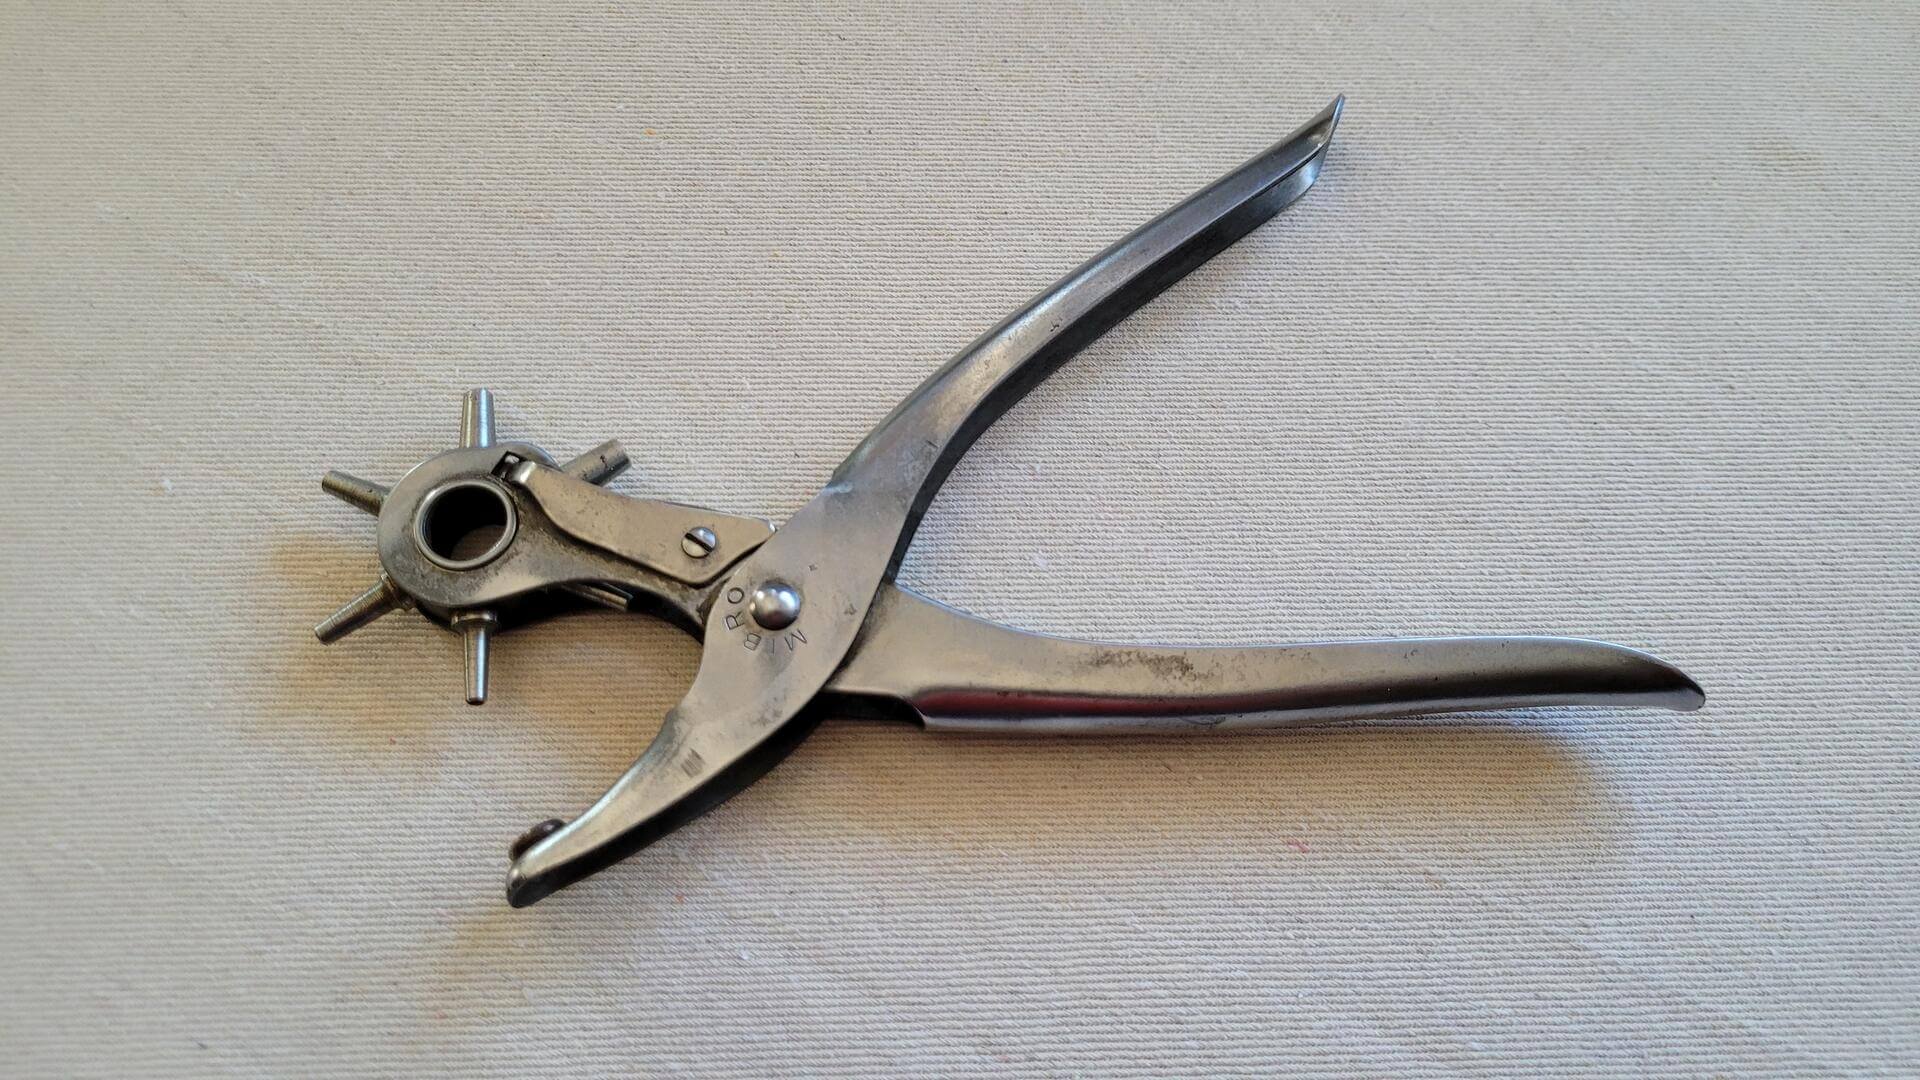 Vintage Mibro revolving leather hole punch pliers. Antique made in England collectible cobbler and leathermaking hand tool with 6 different punch size diameters